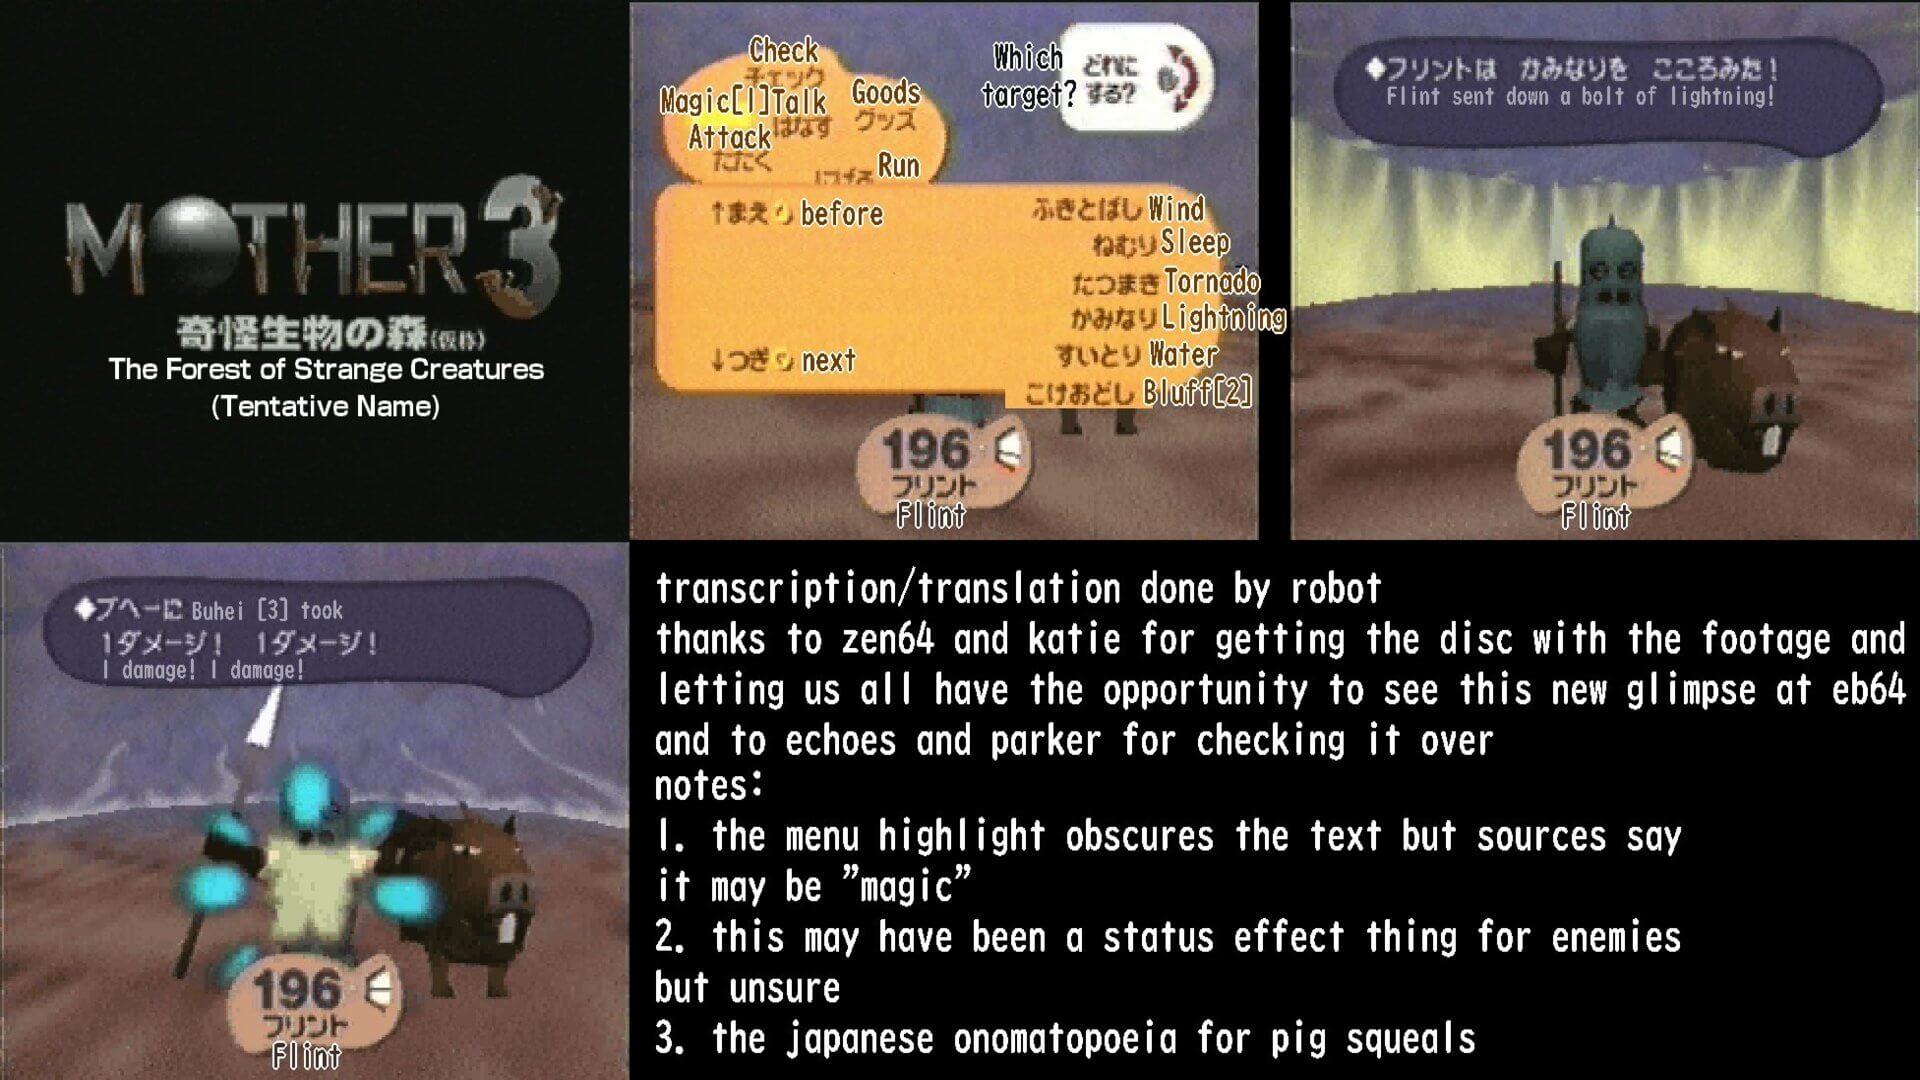 Translations of the text in the EarthBound 64 footage, courtesey of @blameitonrobot on Twitter.